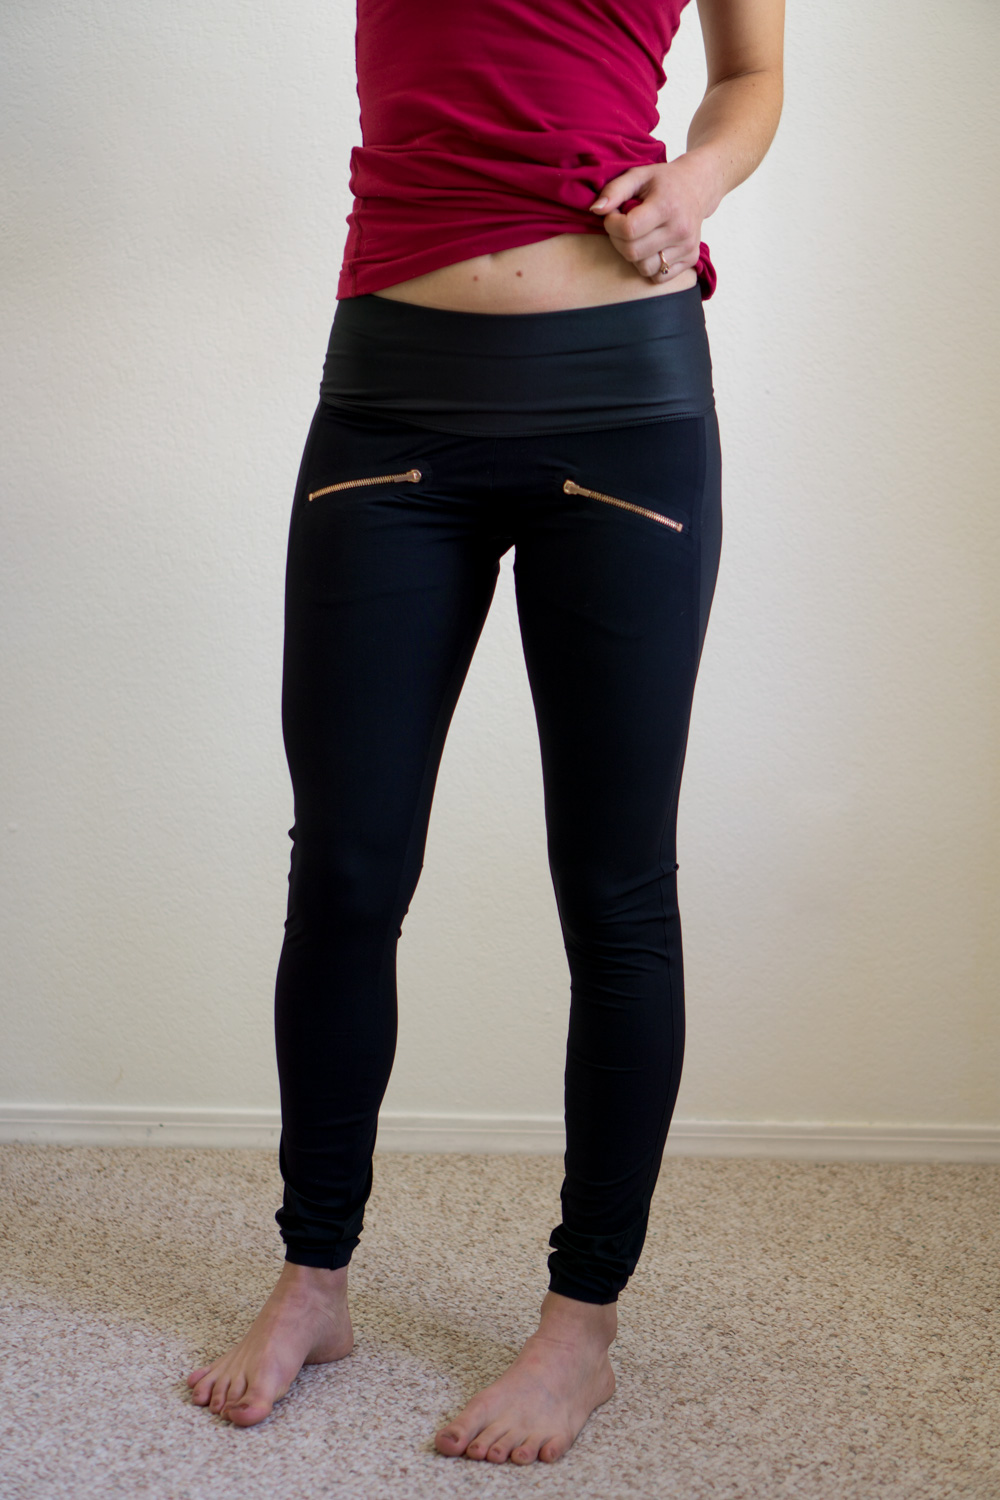 Why do people find leggings comfortable? - Quora